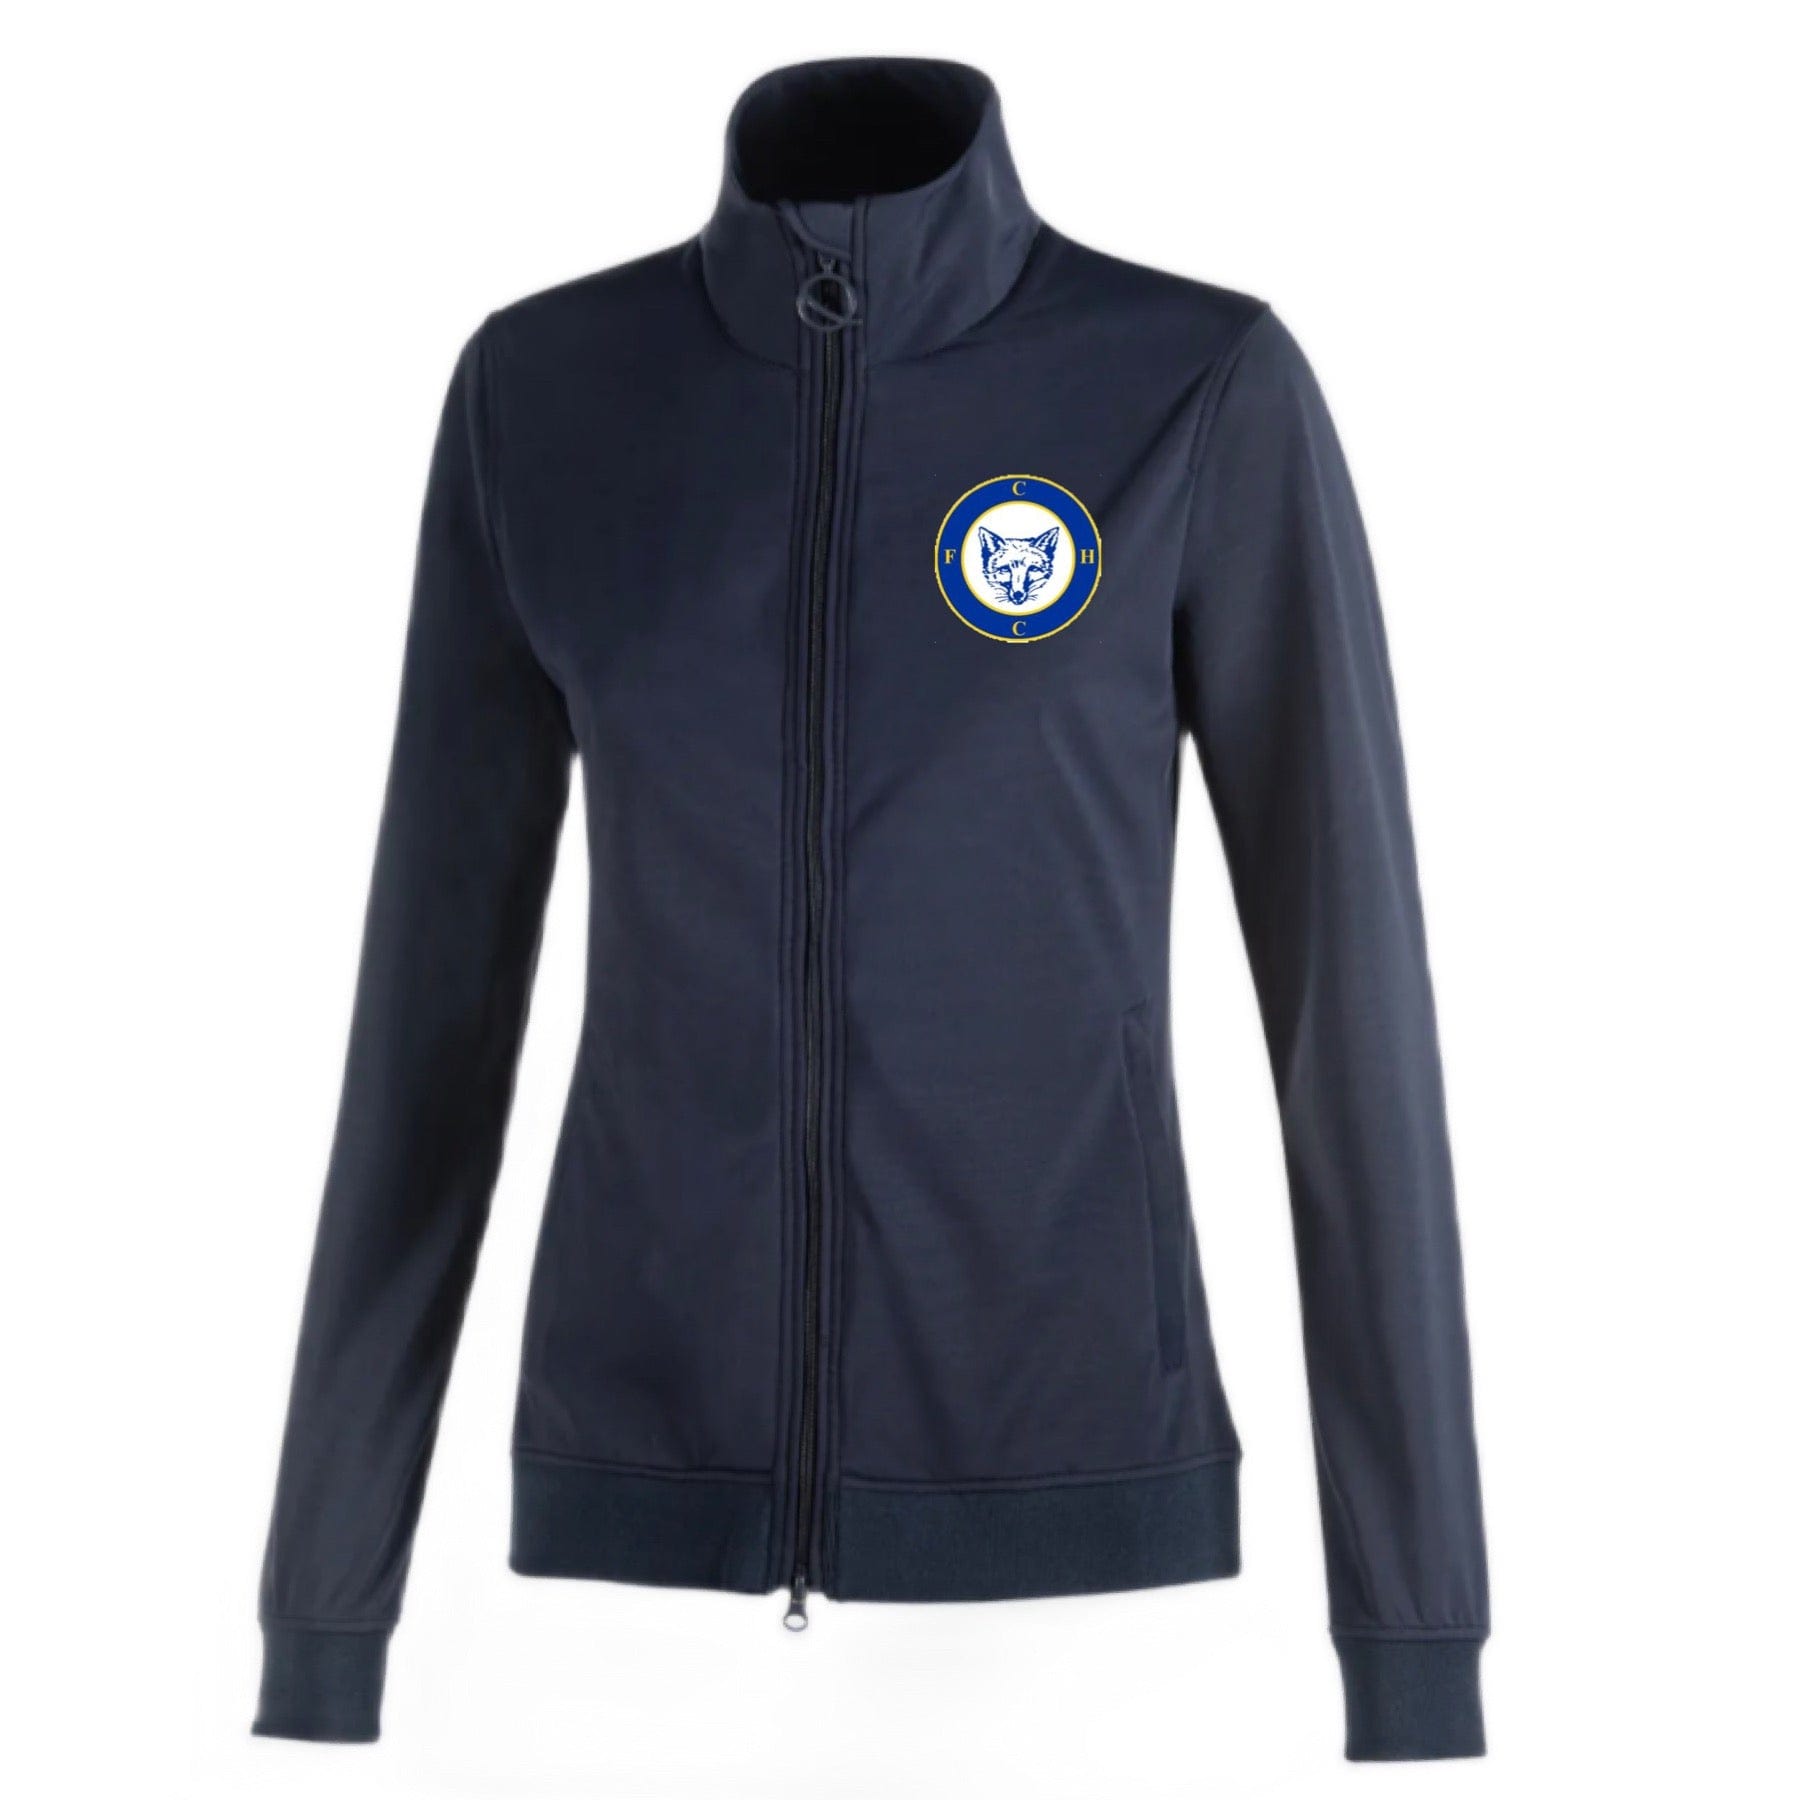 Equestrian Team Apparel FCHC Eqode Schooling Jacket equestrian team apparel online tack store mobile tack store custom farm apparel custom show stable clothing equestrian lifestyle horse show clothing riding clothes horses equestrian tack store